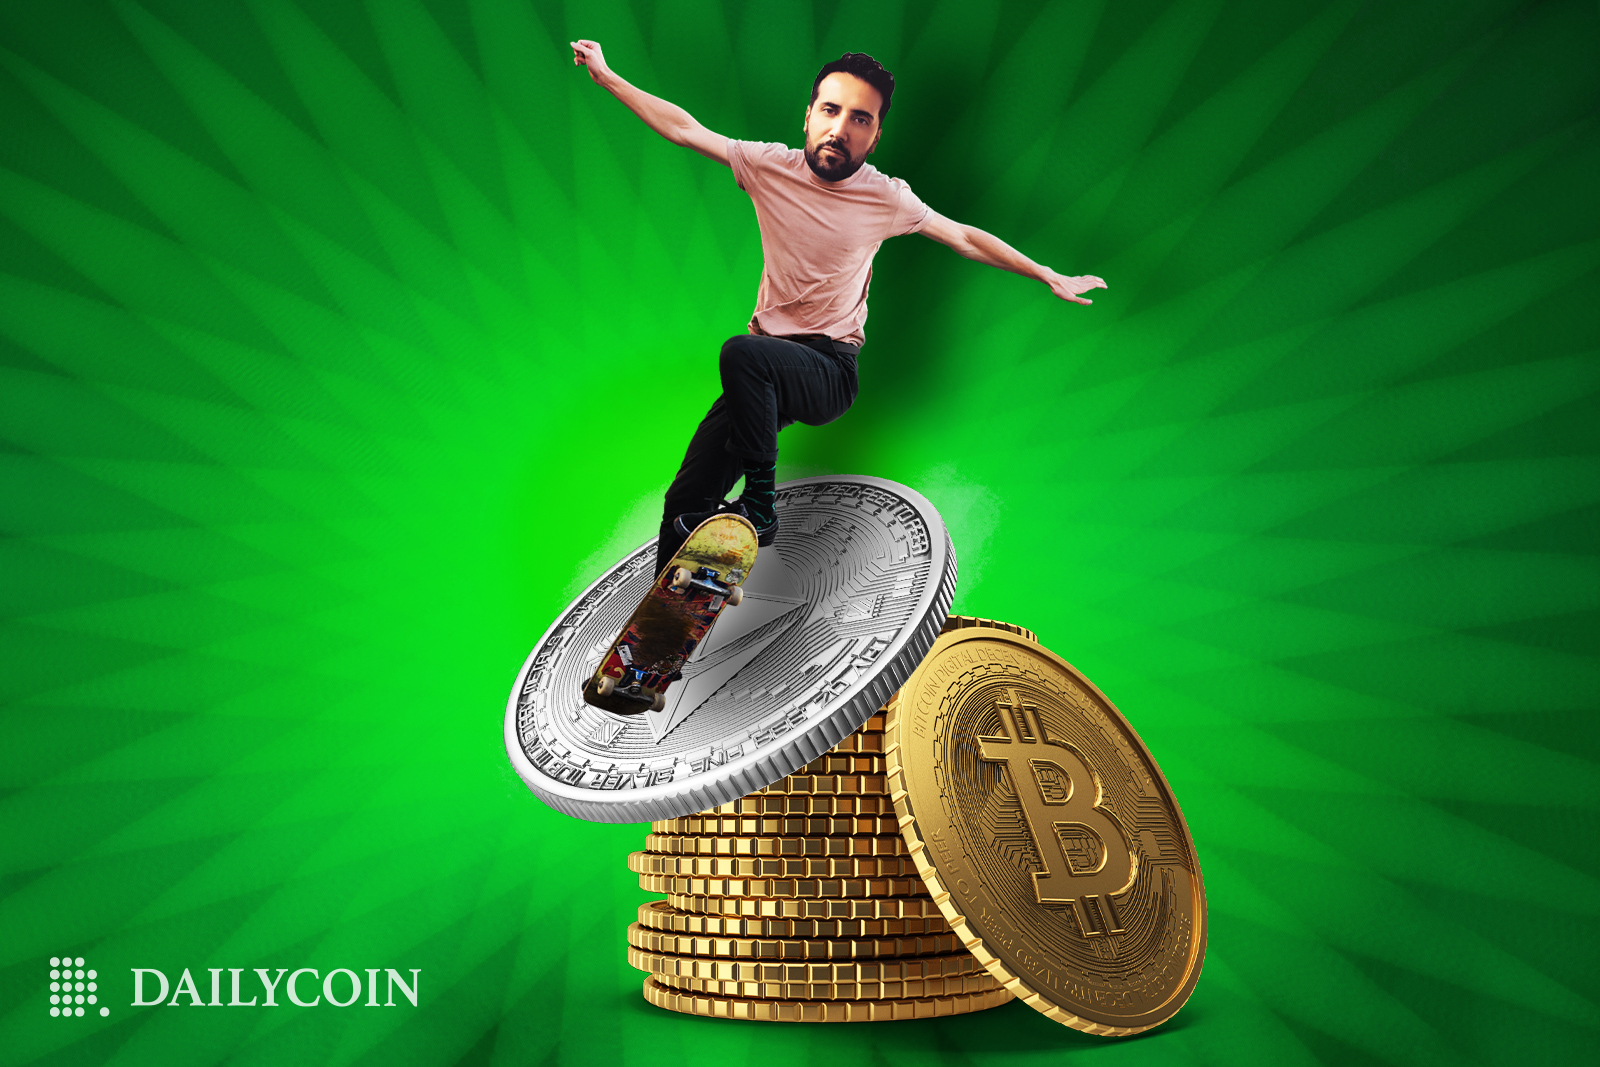 David Gokhshtein riding a skateboard on top of Ethereum and Bitcoin coin stack.